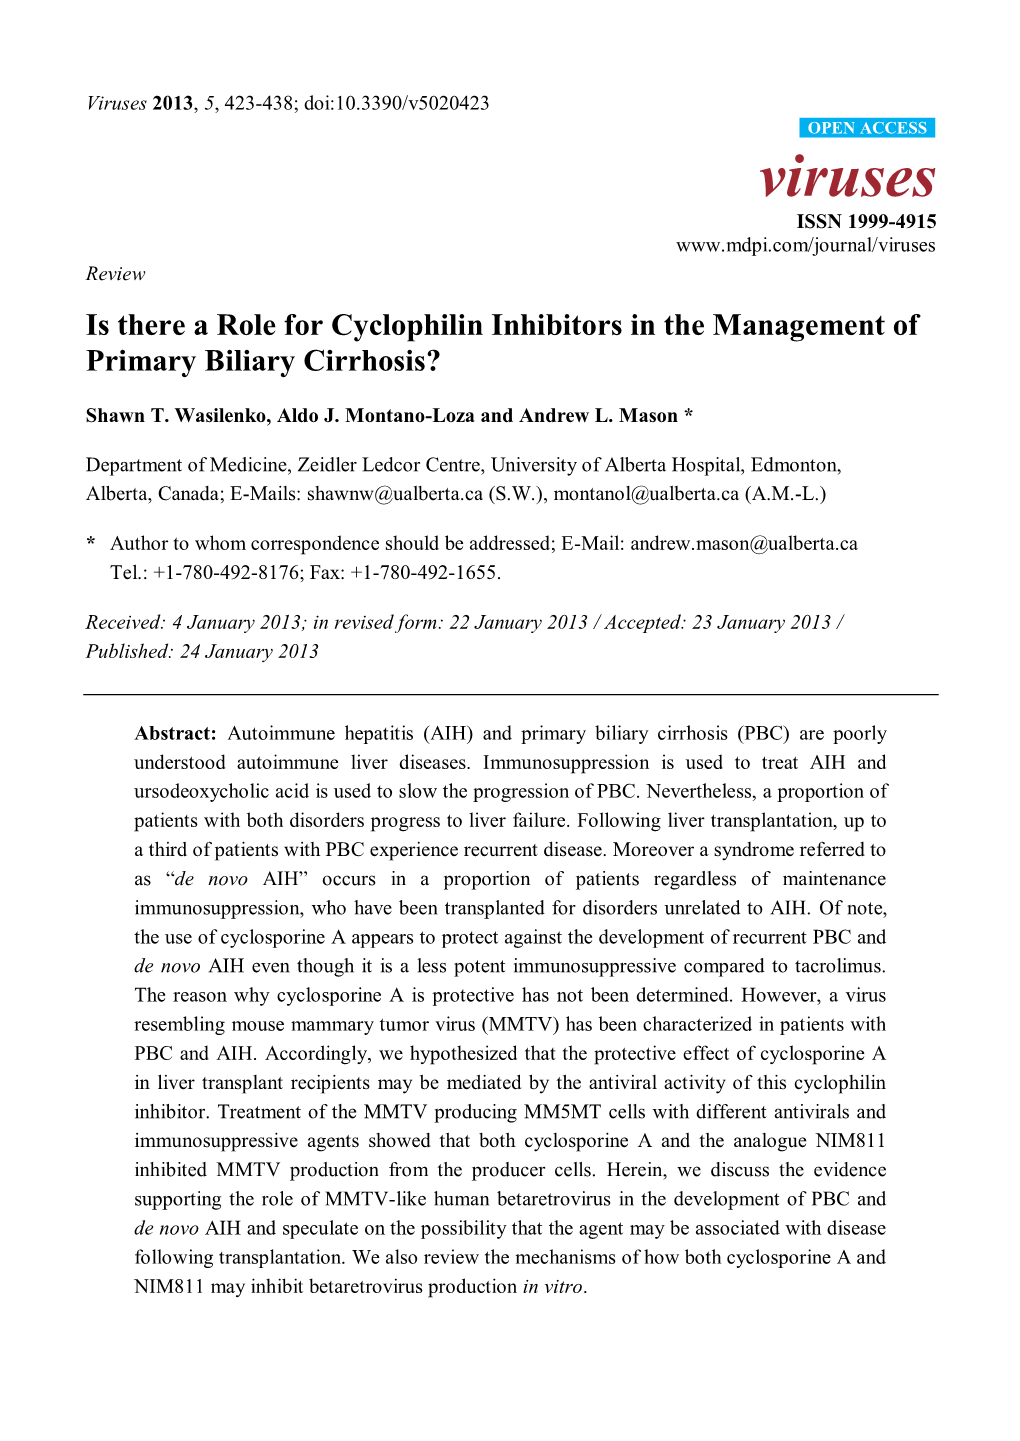 Is There a Role for Cyclophilin Inhibitors in the Management of Primary Biliary Cirrhosis?